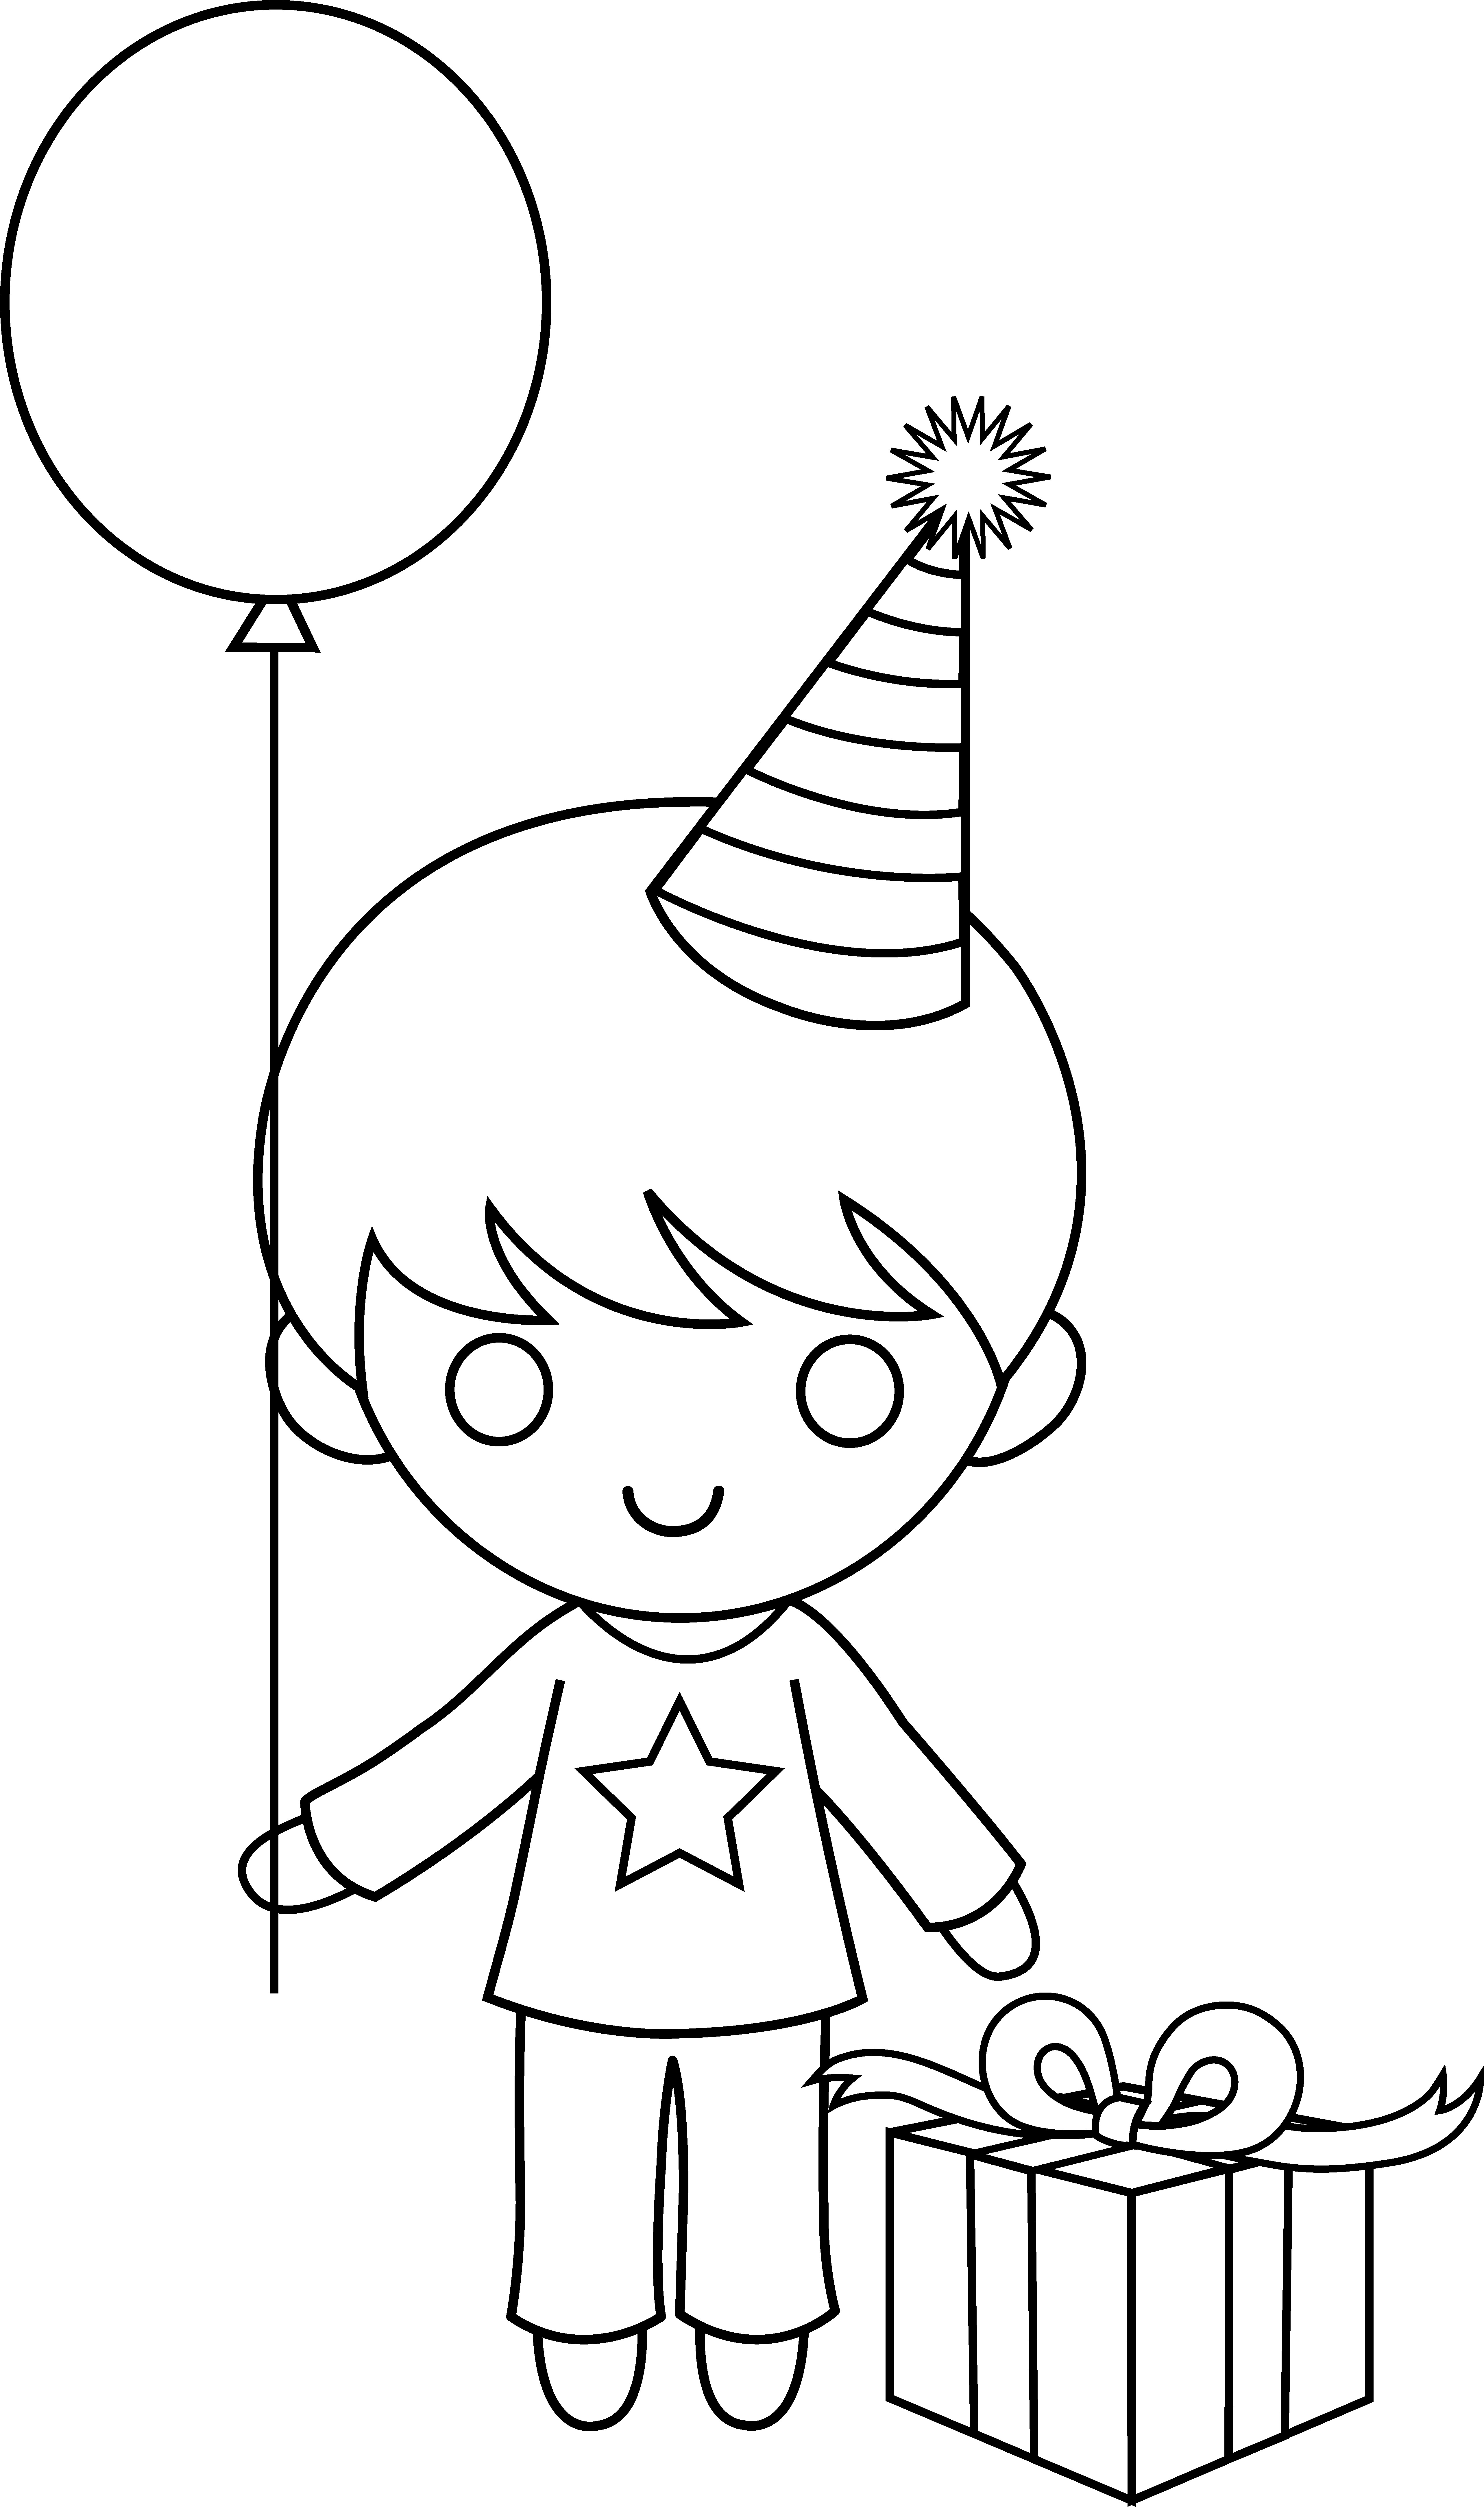 Birthday Coloring Pages For Boys
 Birthday Boy Coloring Page Free Clip Art